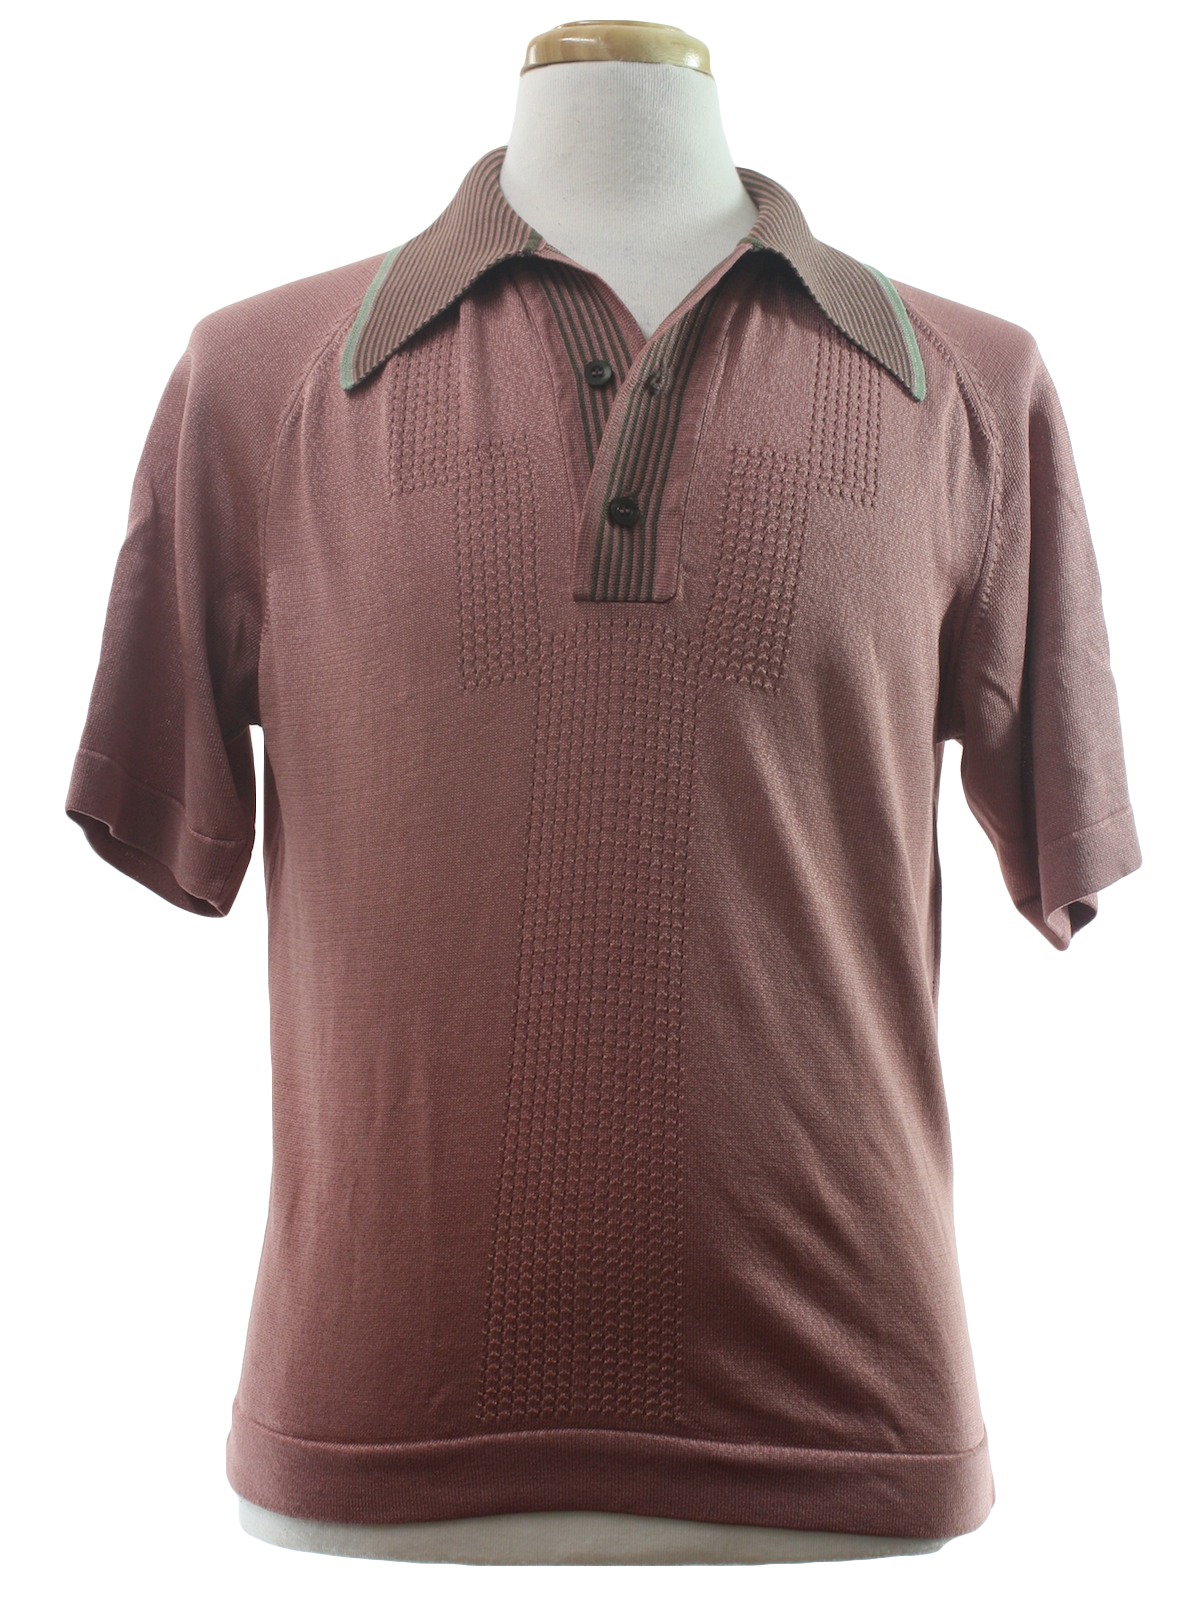 70s Retro Knit Shirt: 70s -Donegal- Mens rosewood, moss and dark olive ...